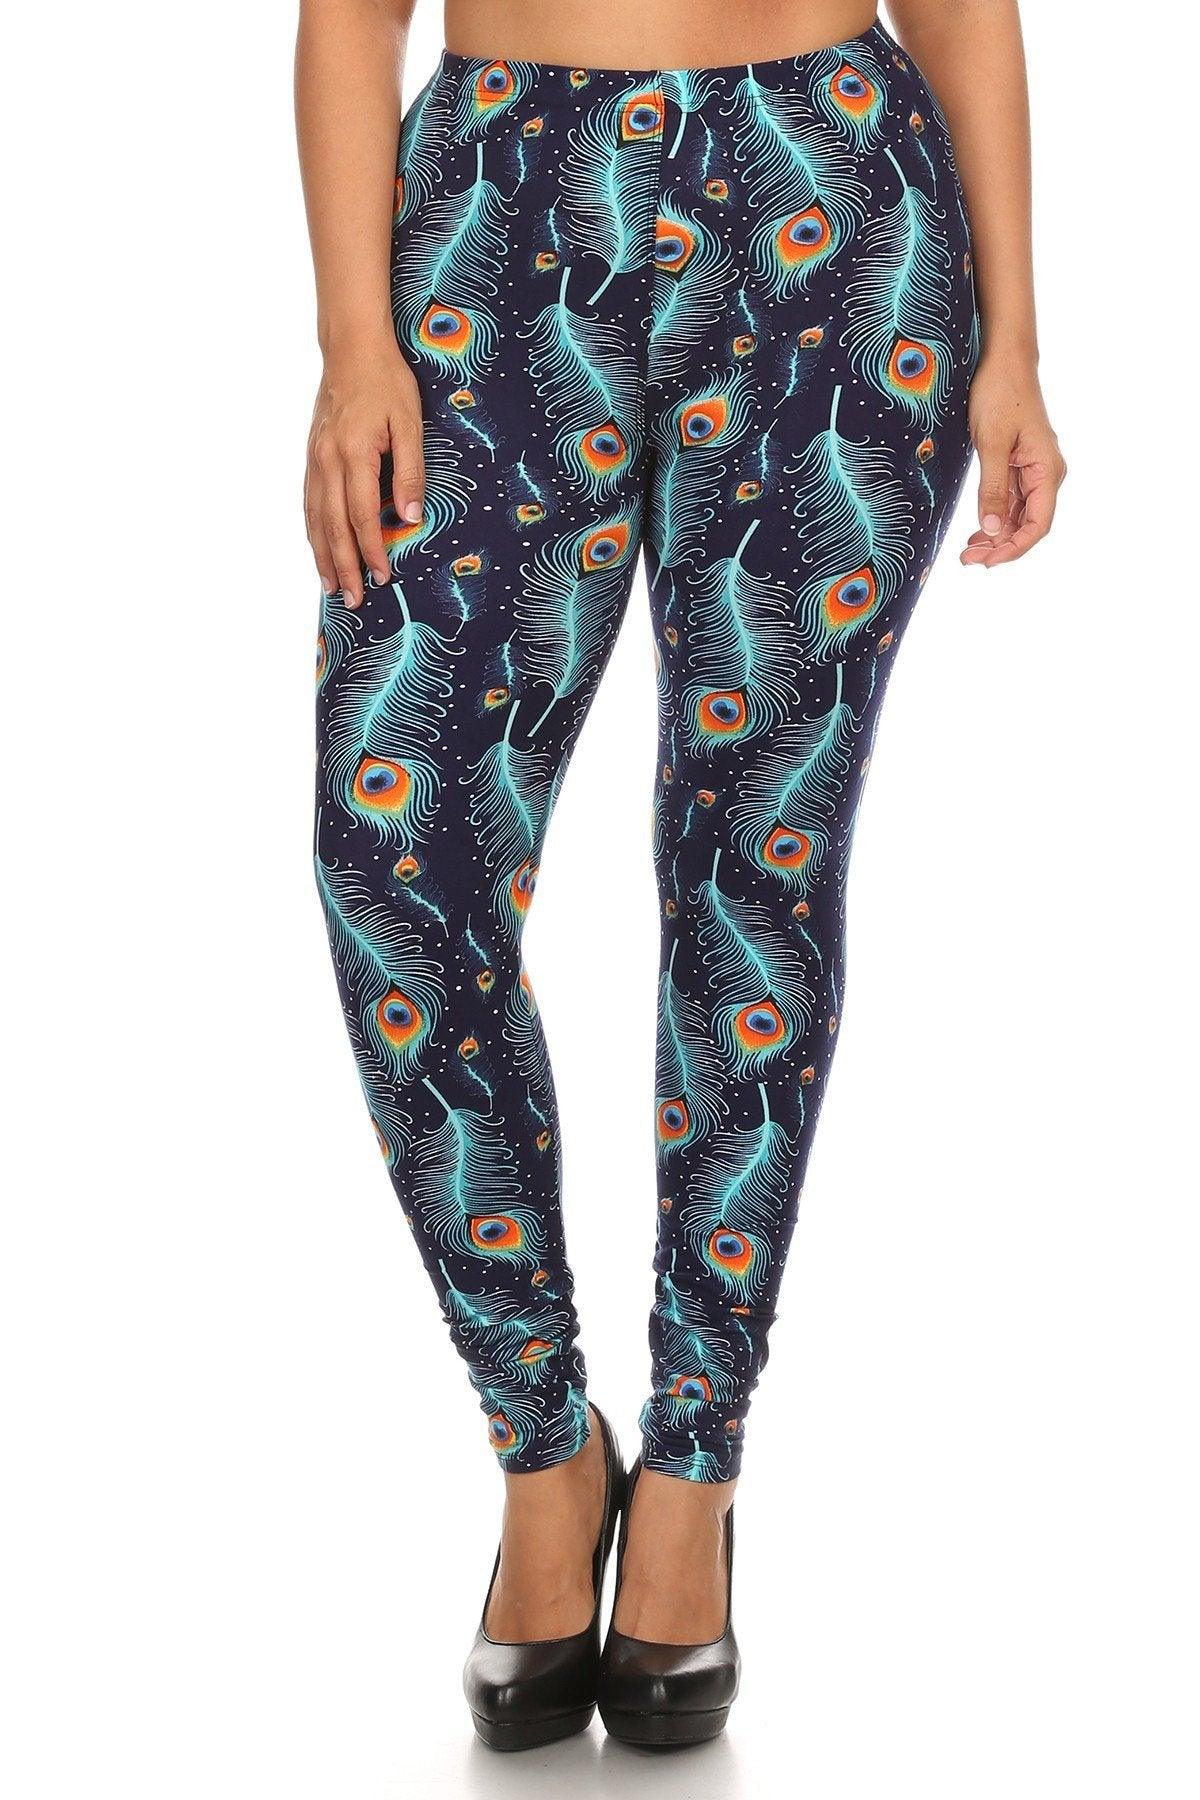 Plus Size Print, Full Length Leggings In A Slim Fitting Style With A Banded High Waist Naughty Smile Fashion